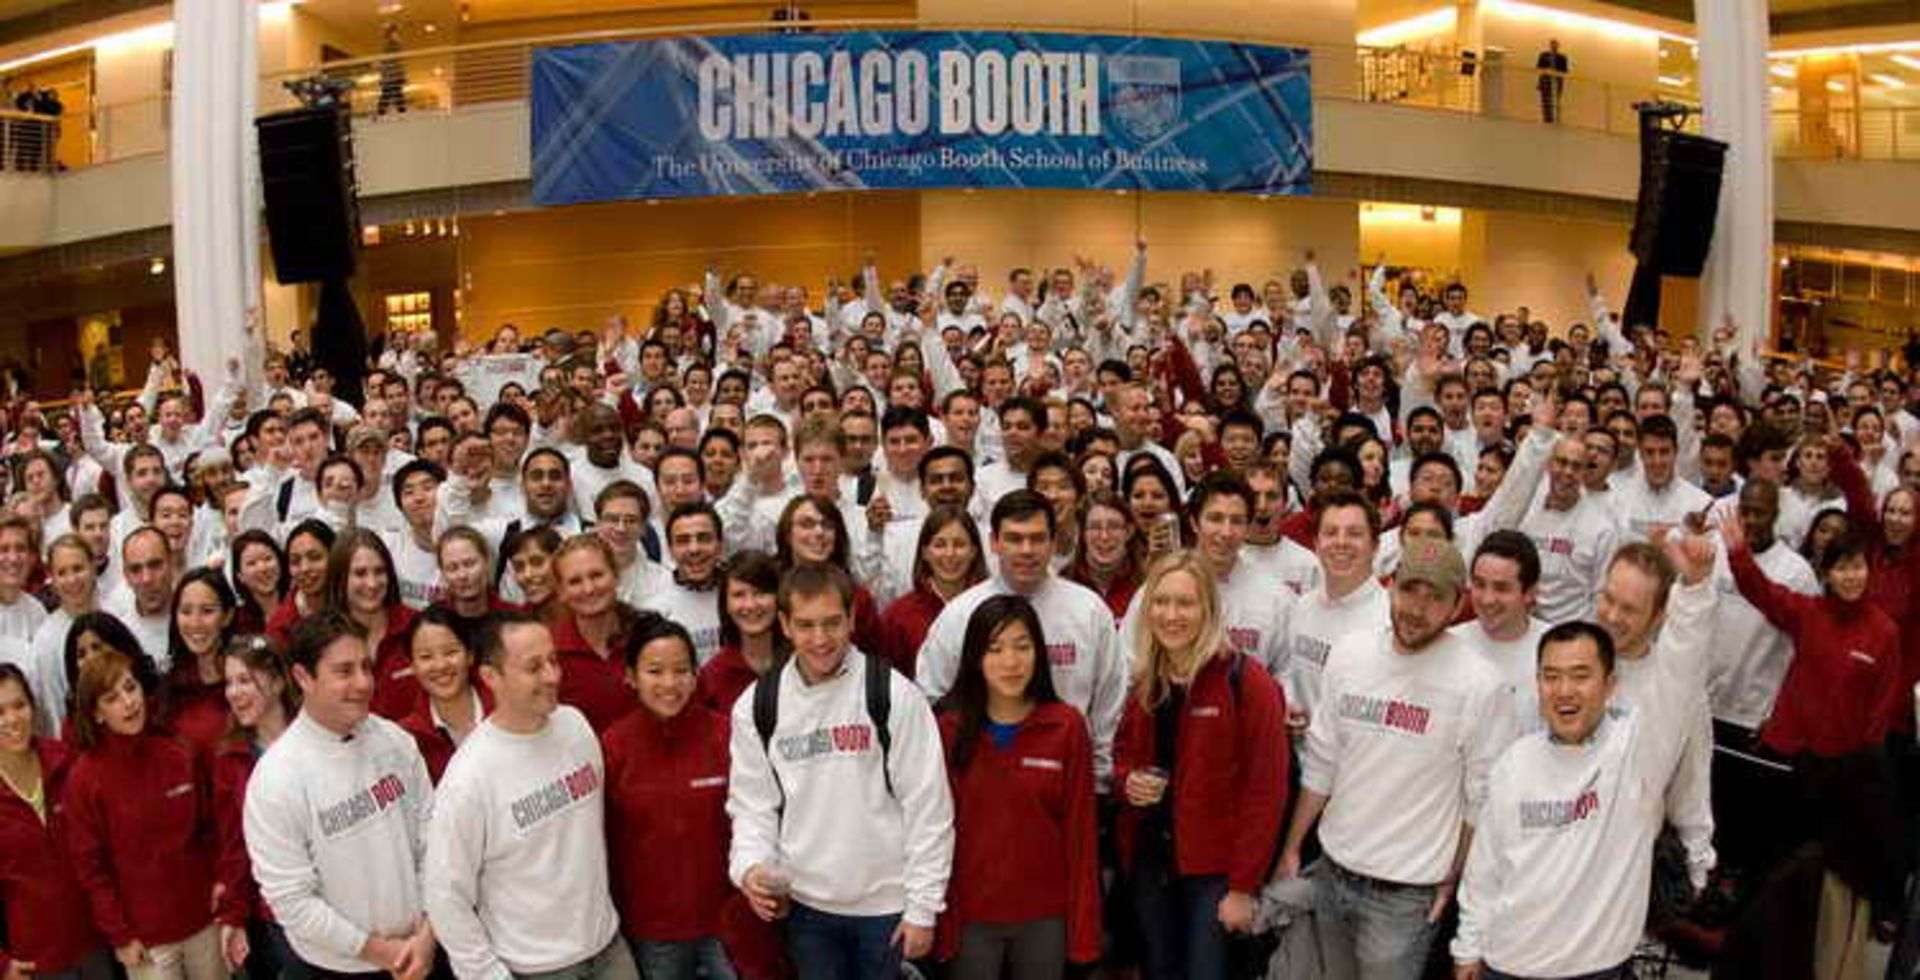 The Chicago Booth Alumni community